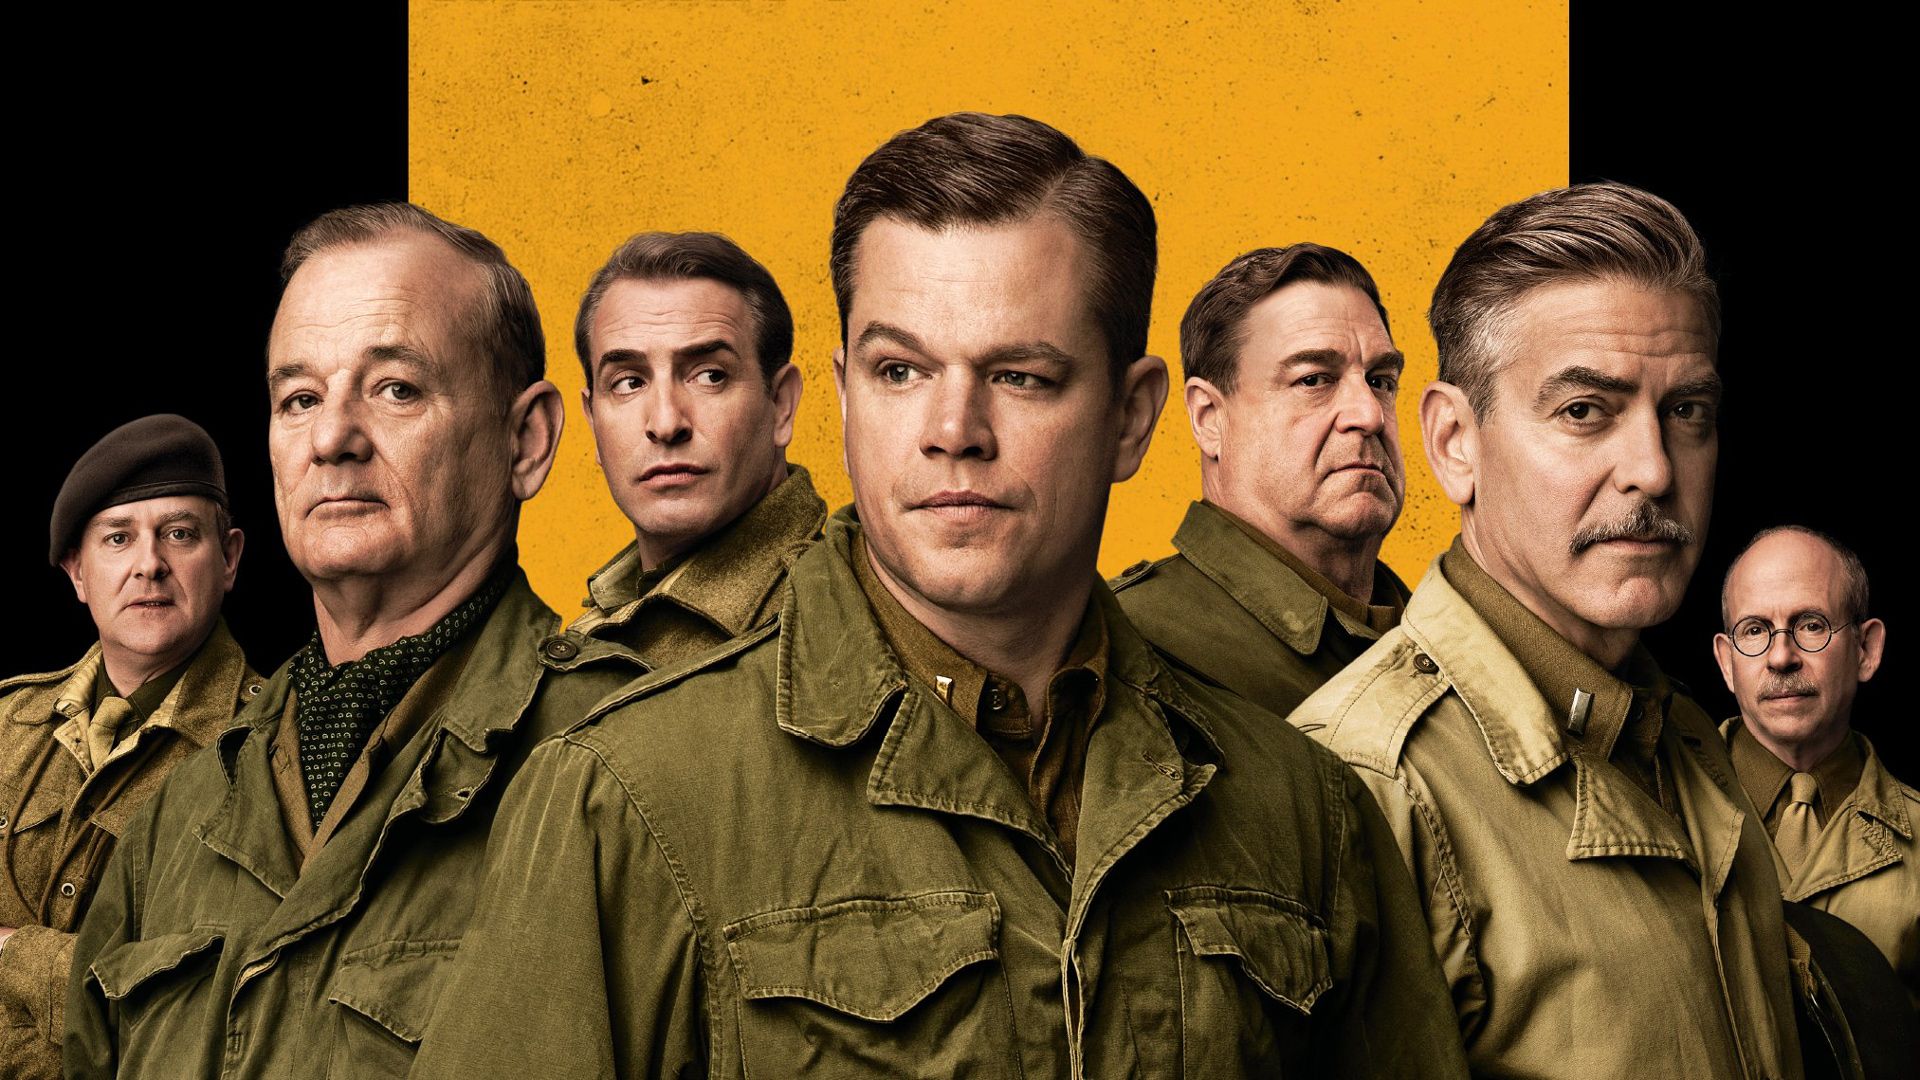 The Monuments Men background